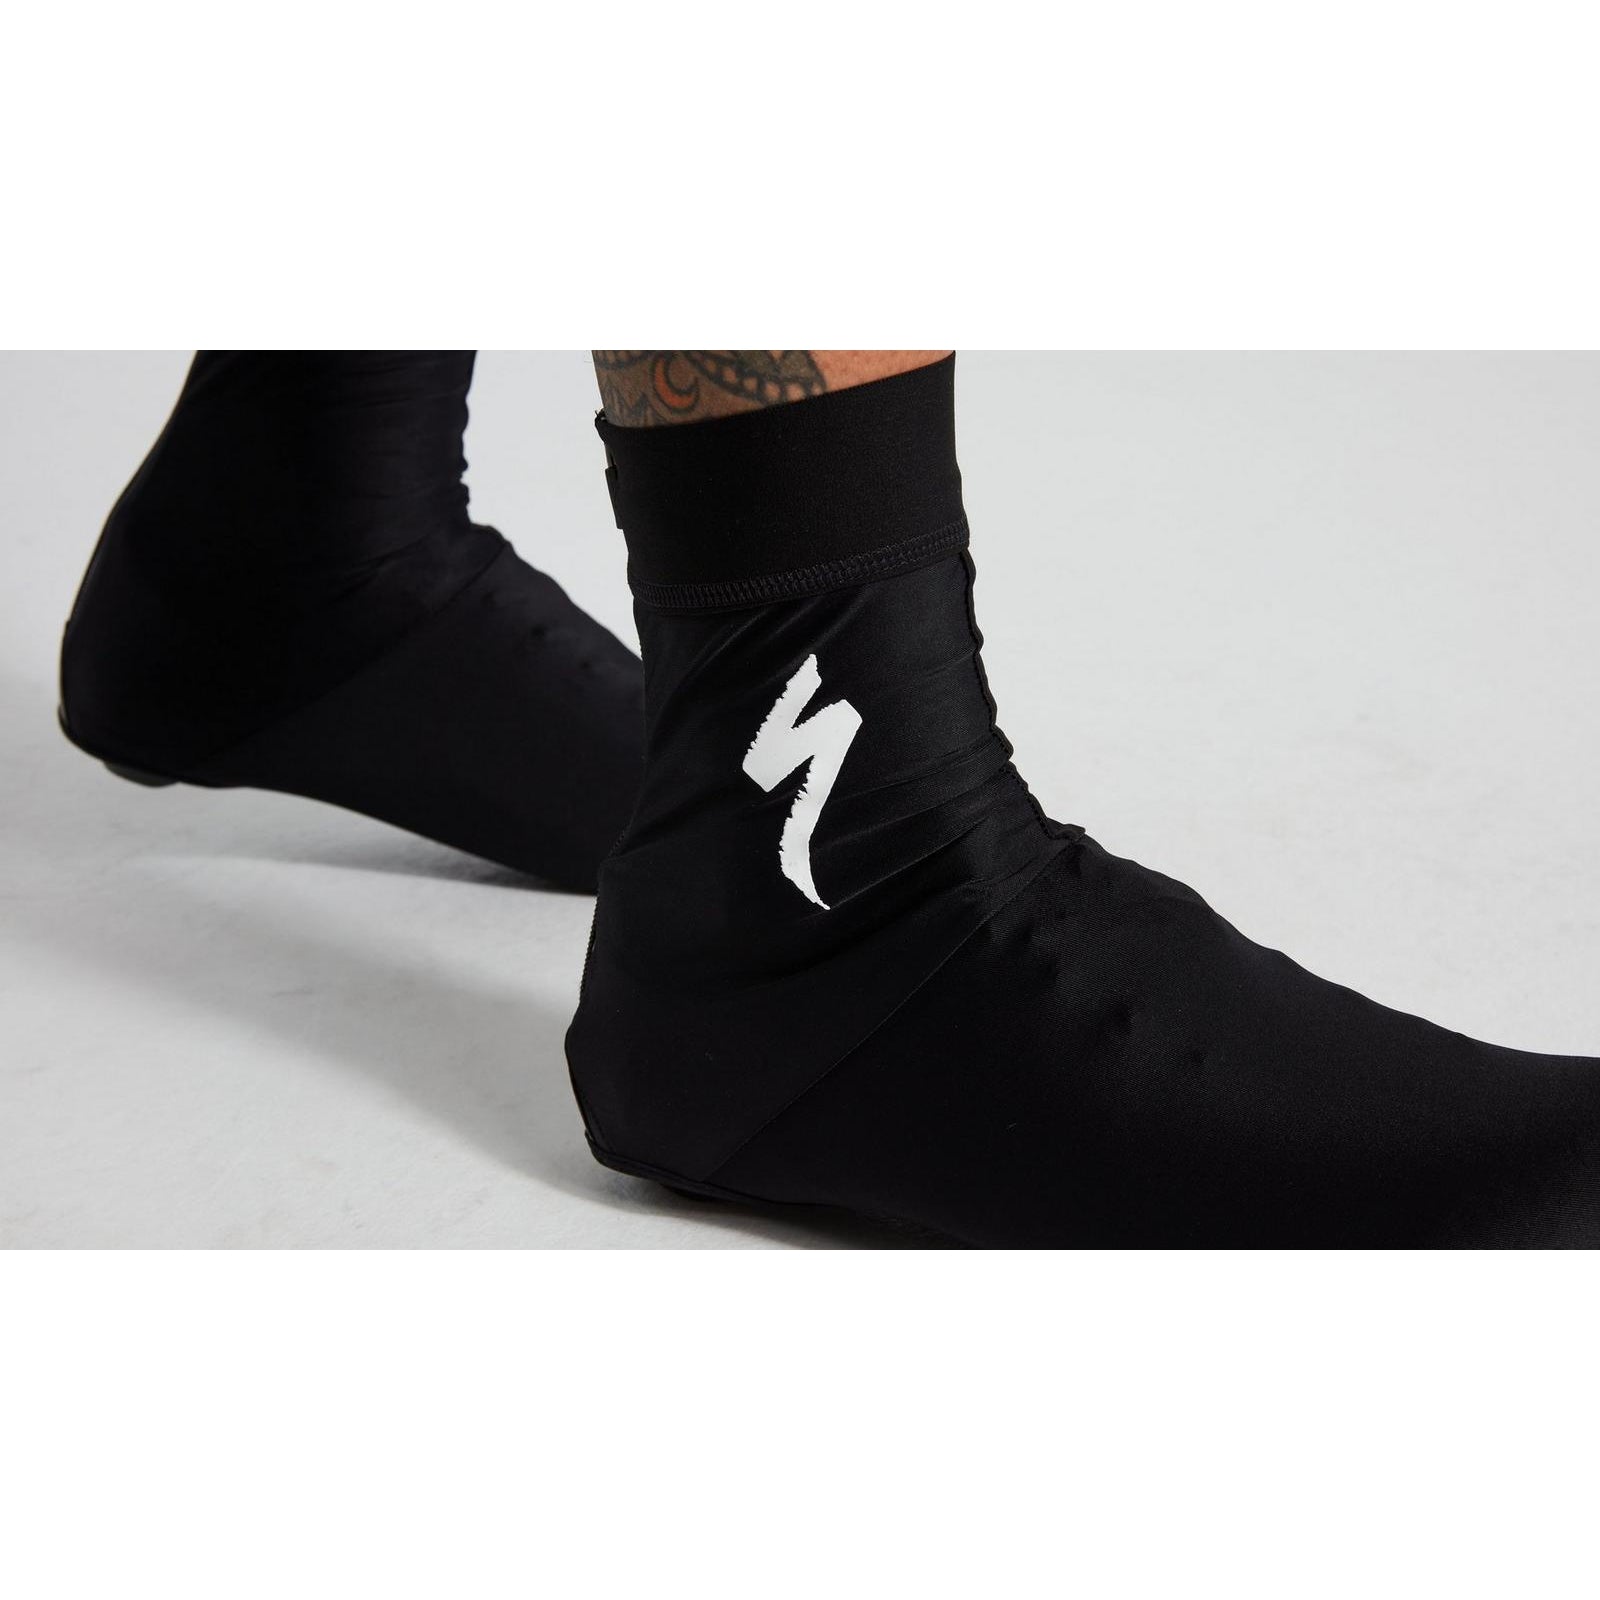 Specialized Logo Shoe Covers - Shoes - Bicycle Warehouse